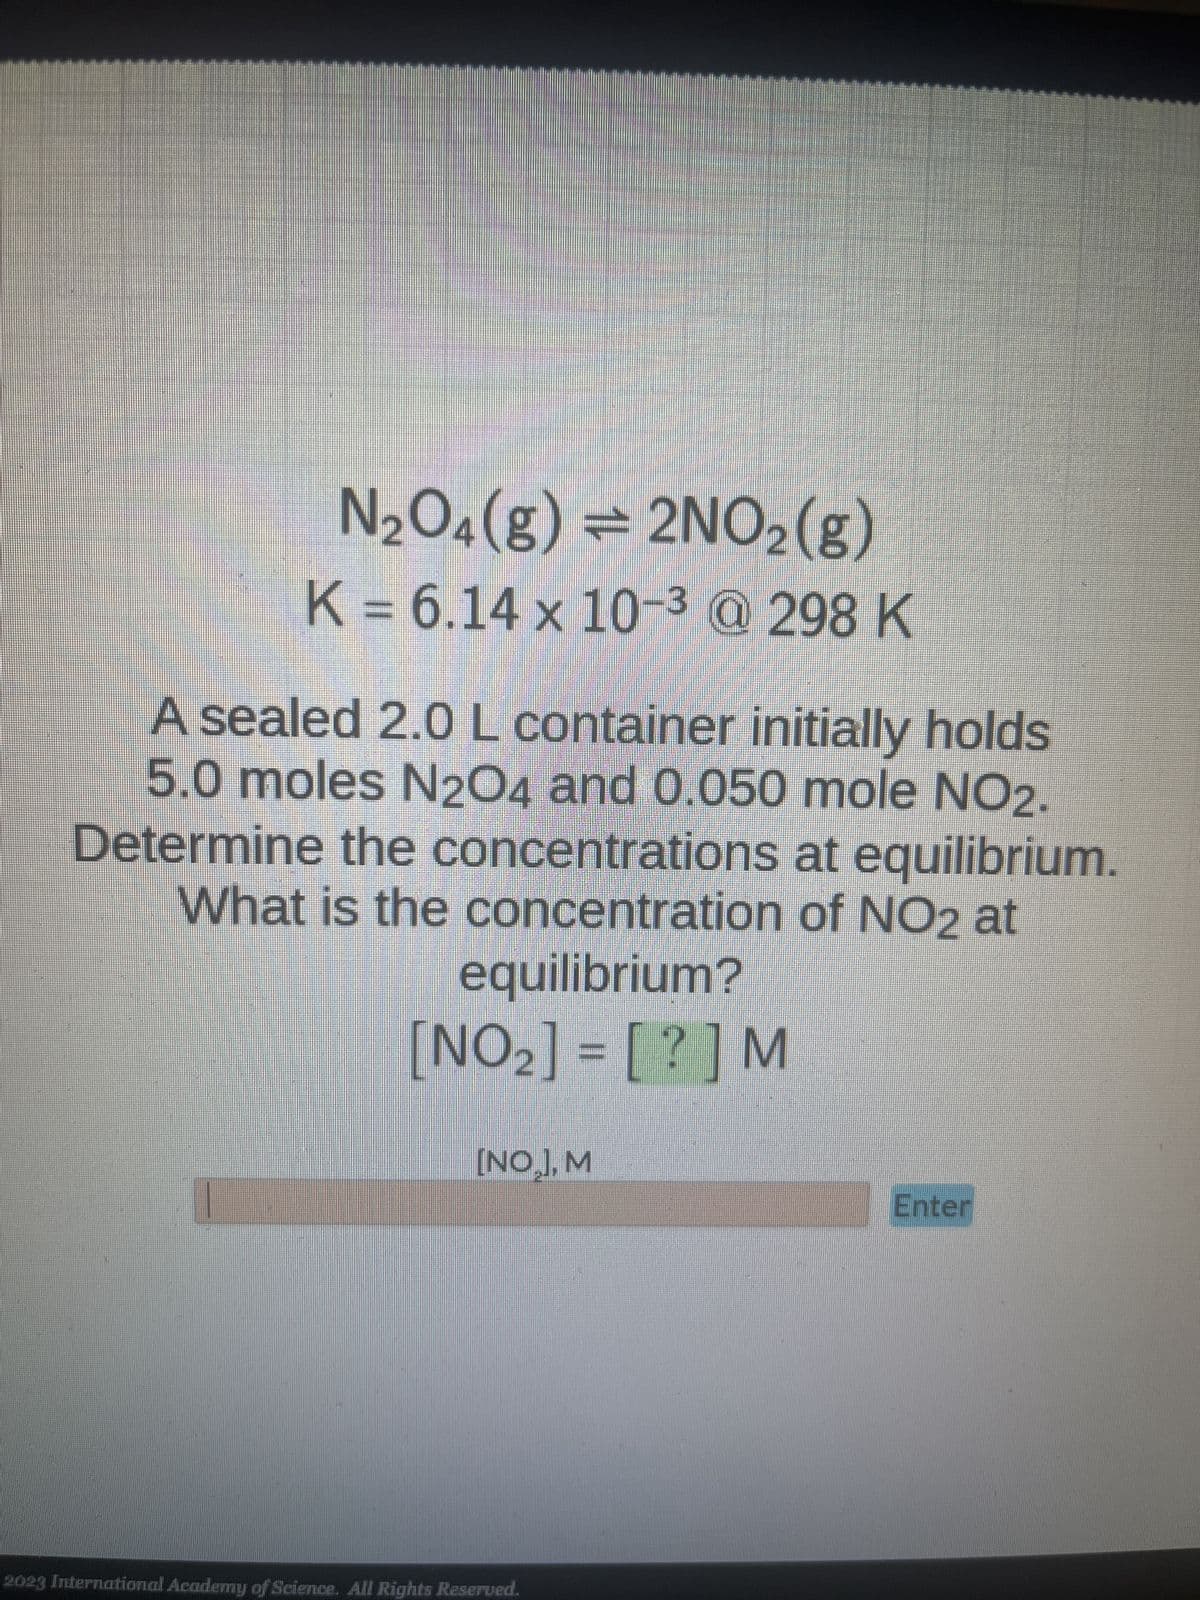 N₂O4(g) = 2NO₂(g)
K = 6.14 × 10-³ @ 298 K
A sealed 2.0 L container initially holds
5.0 moles N2O4 and 0.050 mole NO2.
Determine the concentrations at equilibrium.
What is the concentration of NO2 at
equilibrium?
[NO₂] = [? ] M
I
[NO₂], M
2023 International Academy of Science. All Rights Reserved.
Enter